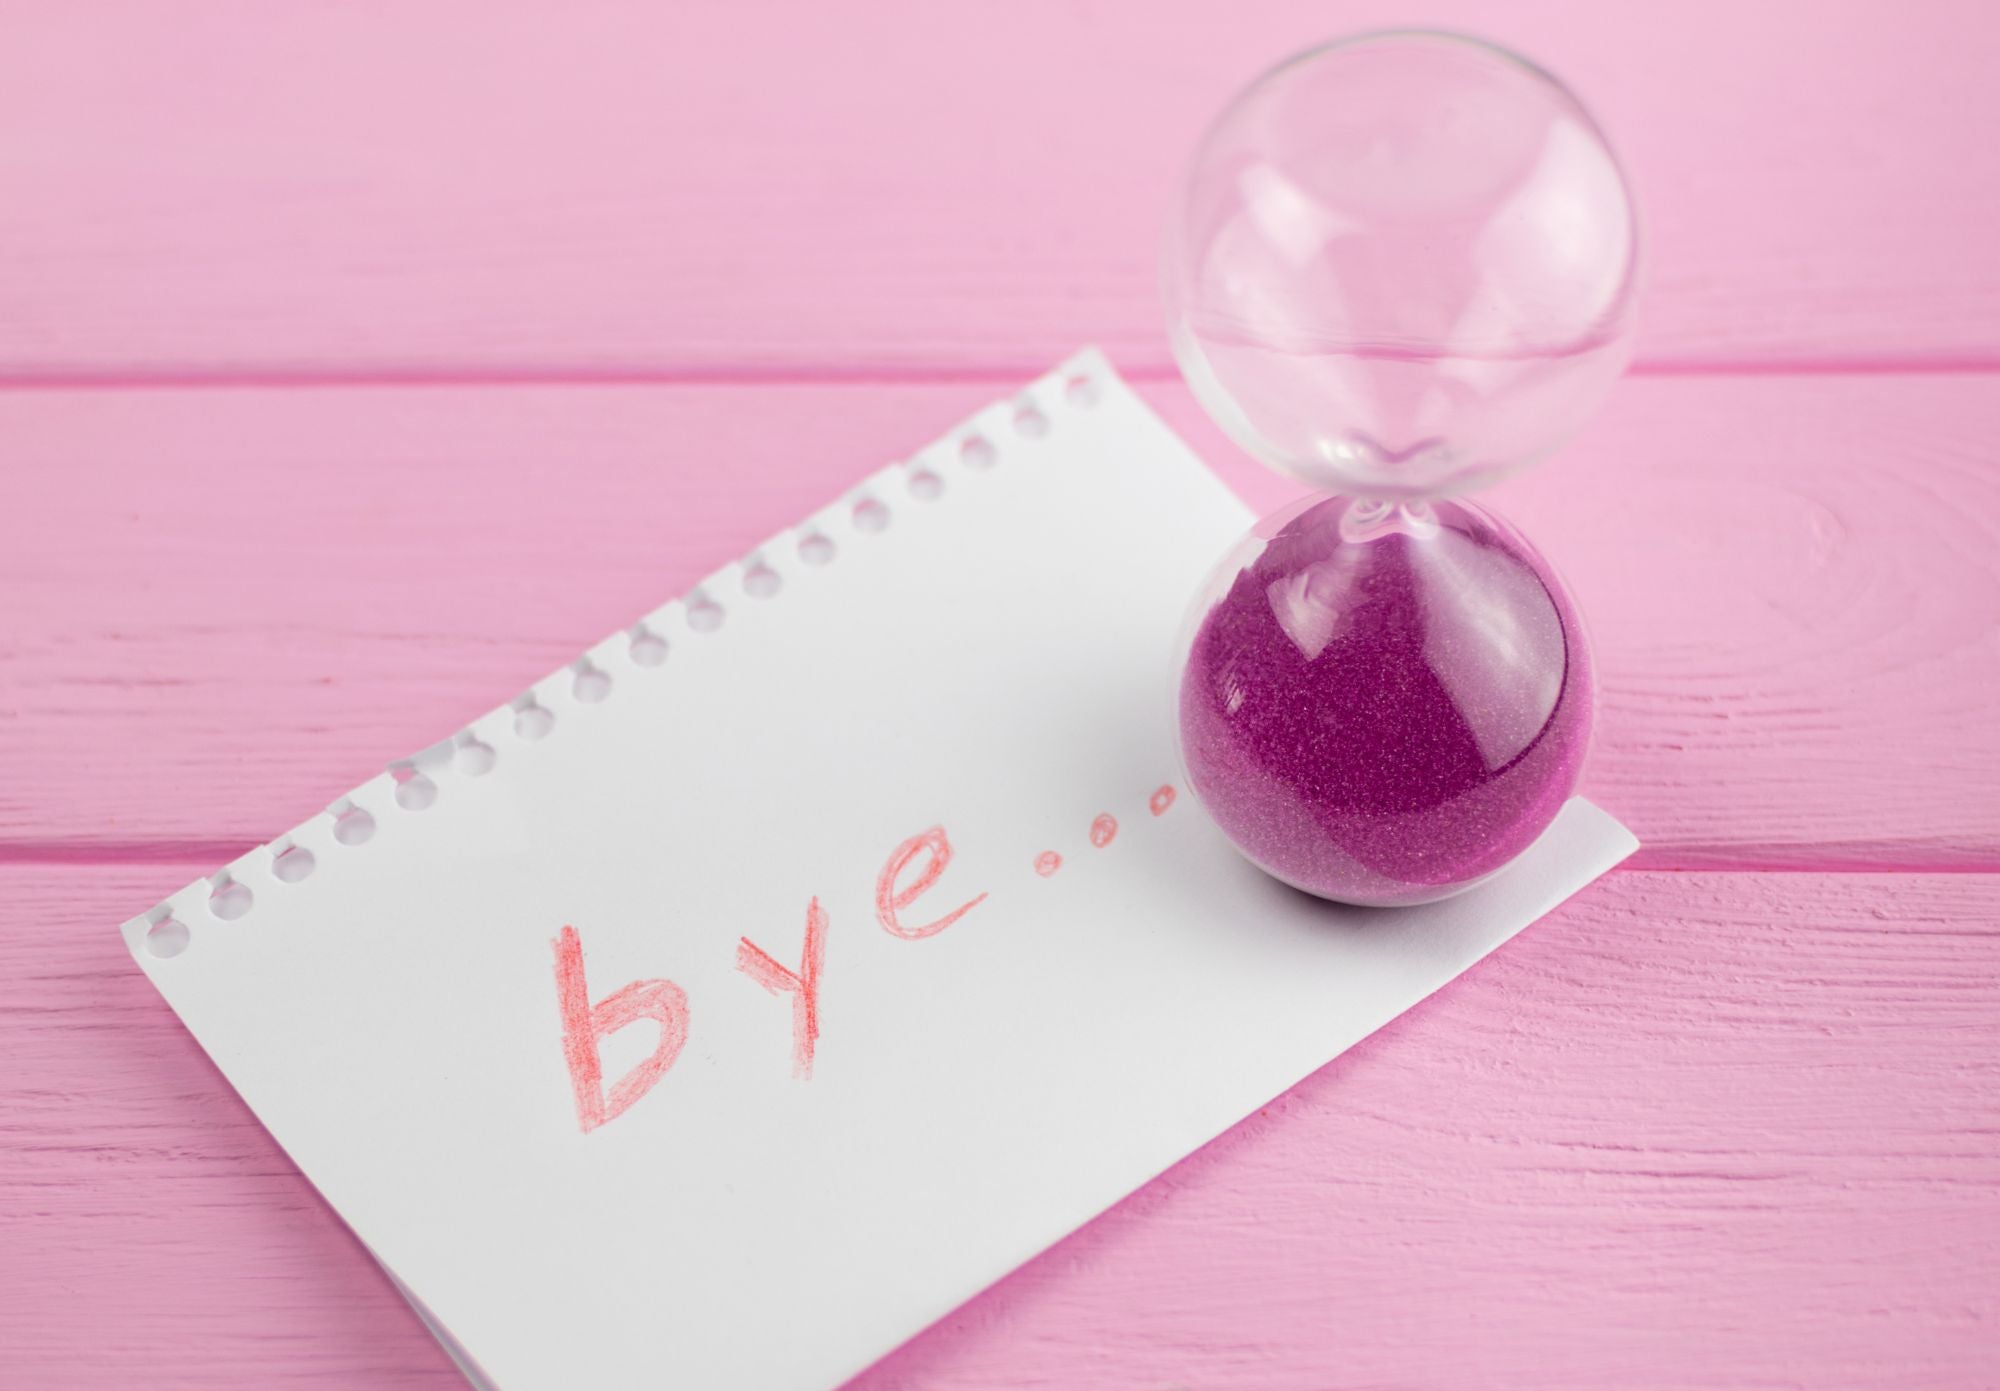 Goodbye, Toxicity! Spring Cleaning Your Relationships